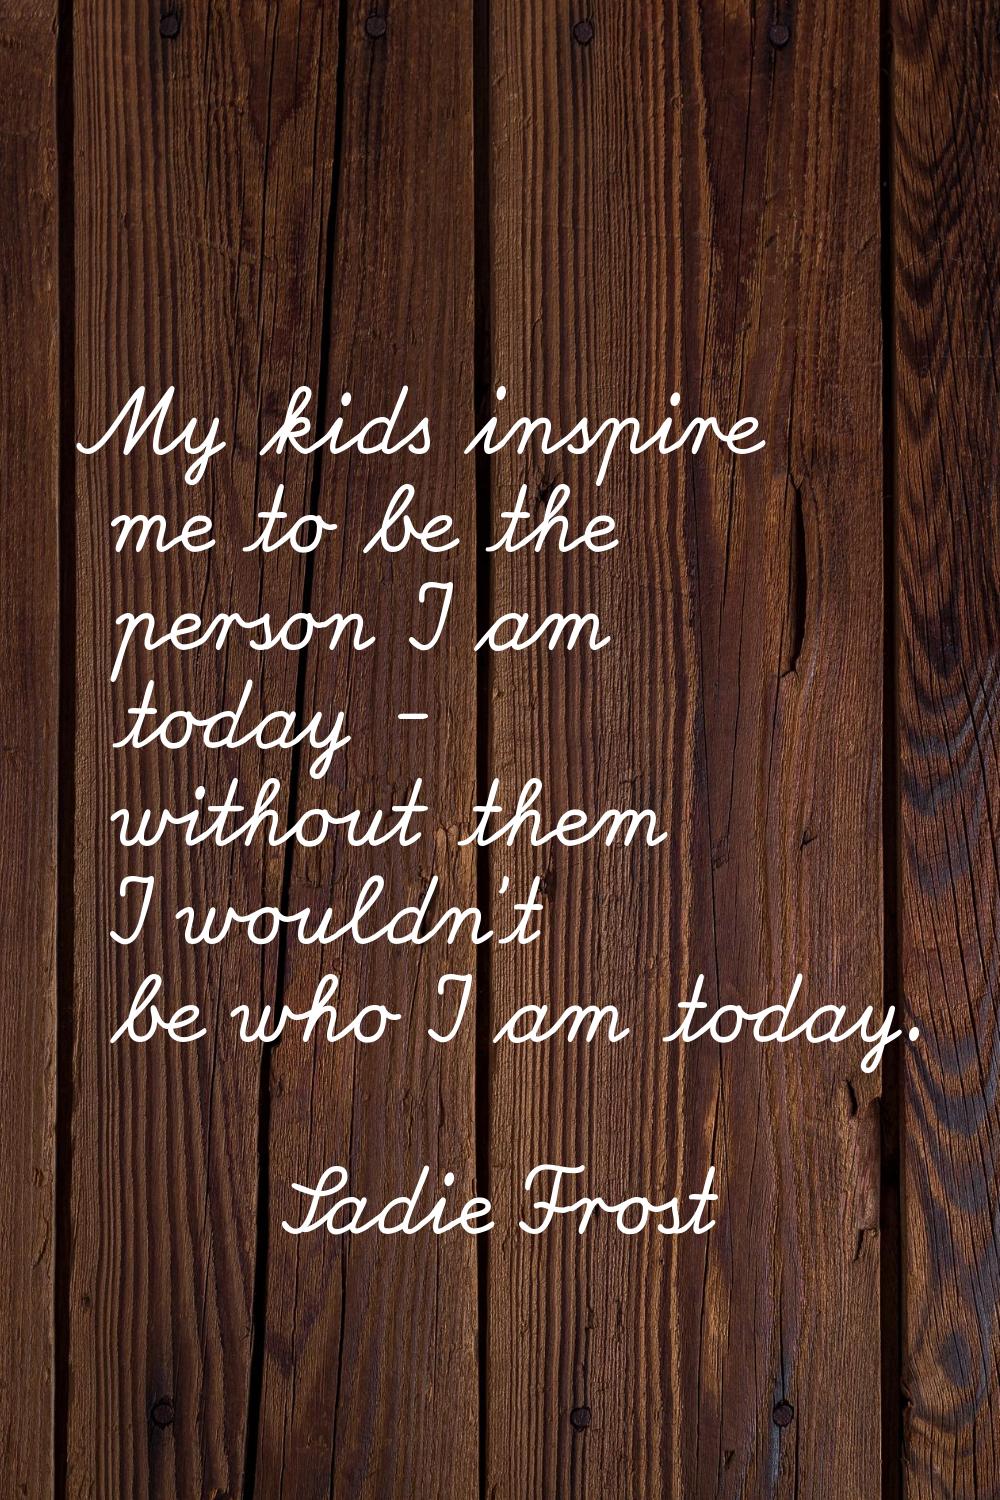 My kids inspire me to be the person I am today - without them I wouldn't be who I am today.